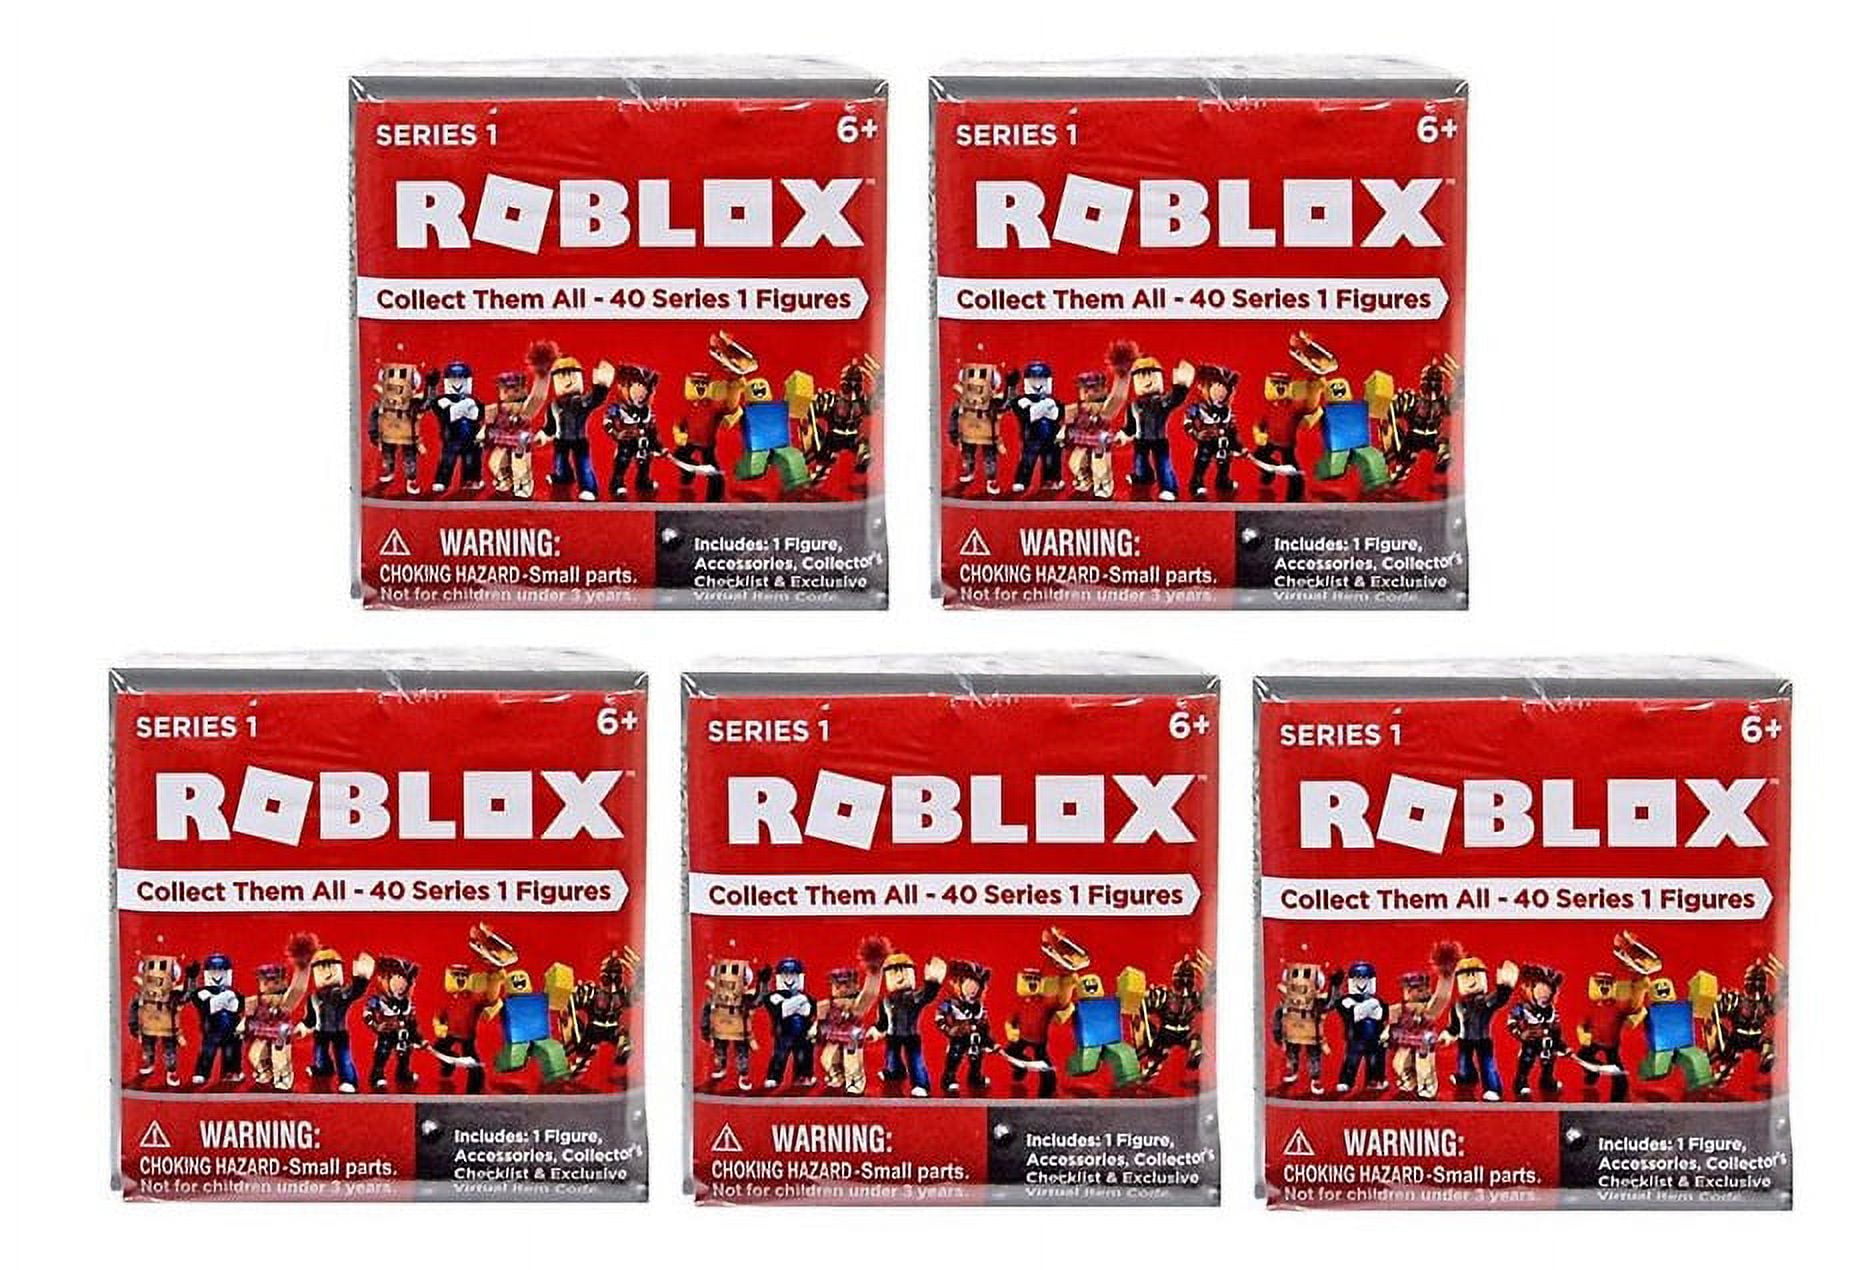 ROBLOX Series 1 Shedletsky action Figure mystery box + Virtual Item Code  2.5: Buy Online at Best Price in UAE 